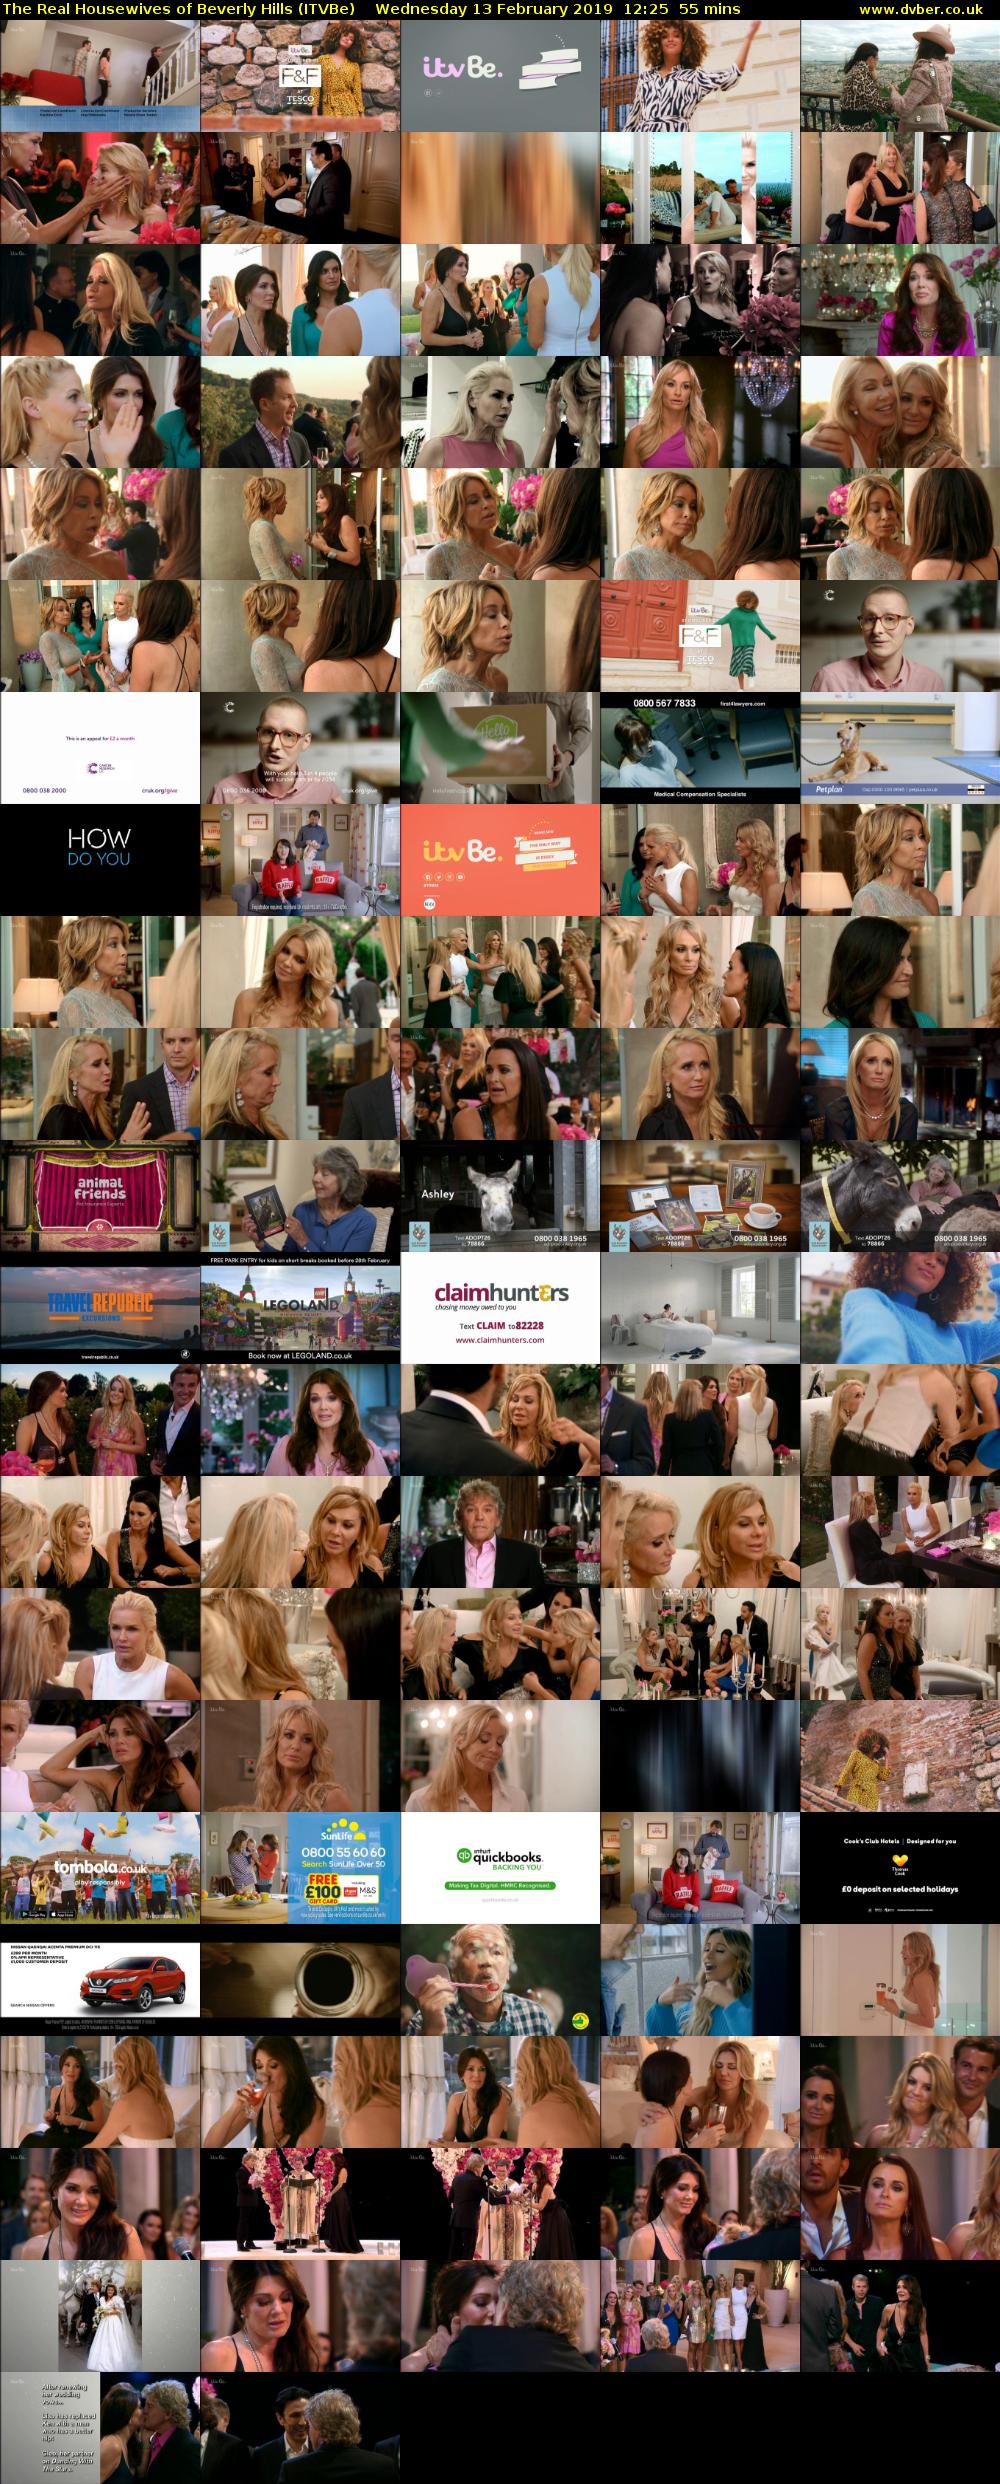 The Real Housewives of Beverly Hills (ITVBe) Wednesday 13 February 2019 12:25 - 13:20